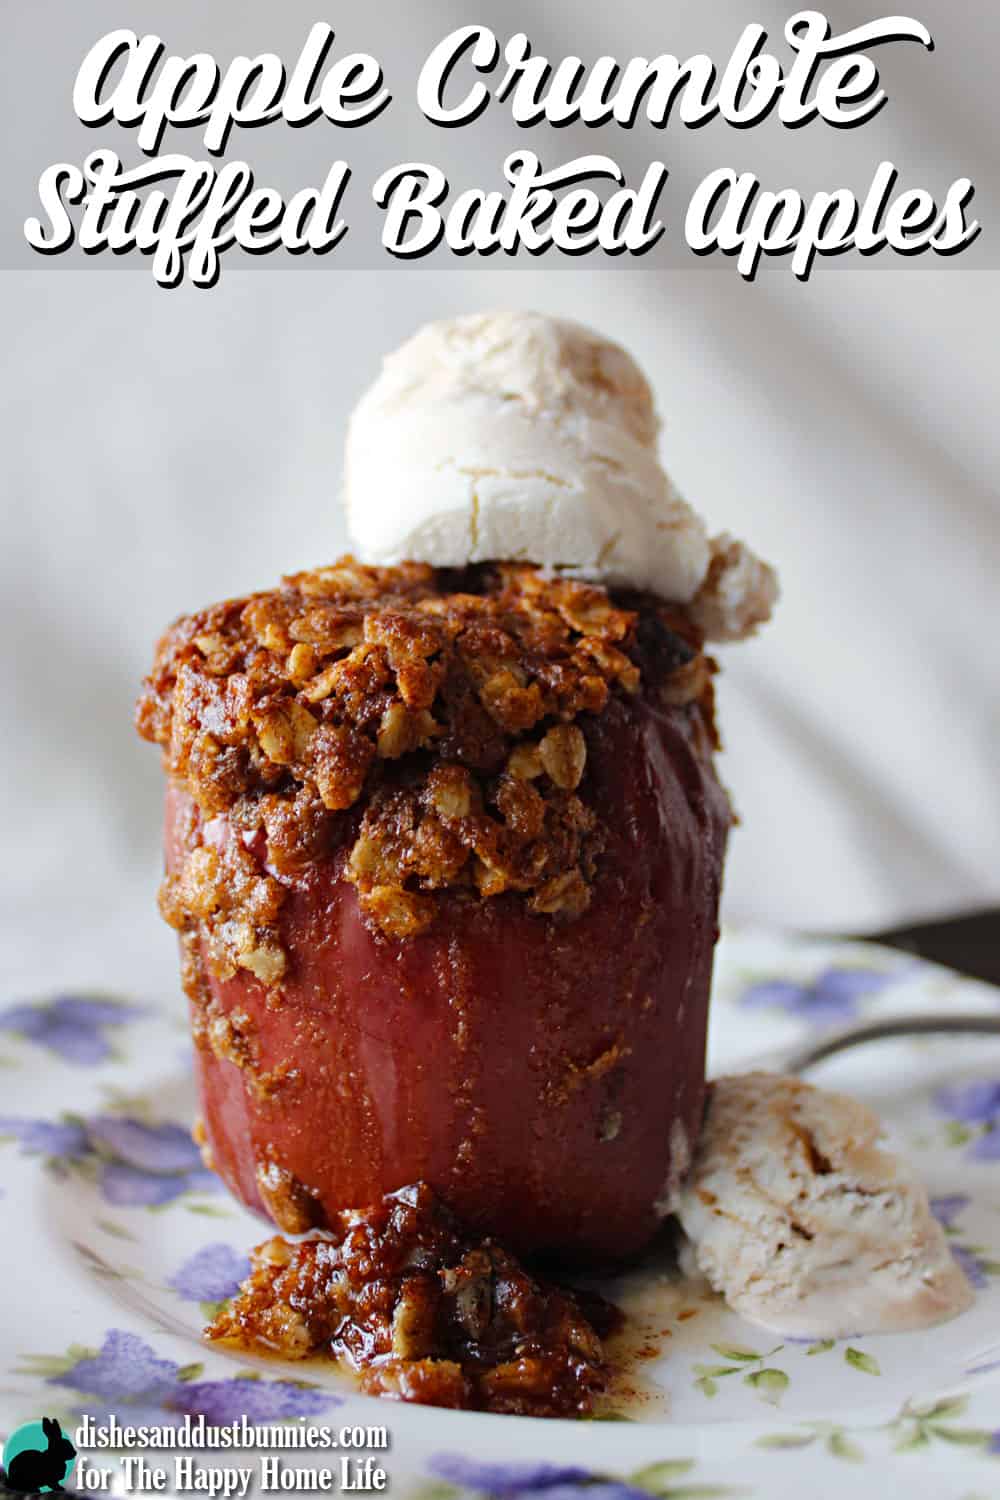 To me, nothing says the beginnings of fall than having a gorgeous delicious Apple Crumble Stuffed Baked Apples. Learn how to make this apple crumble stuffed apples today!